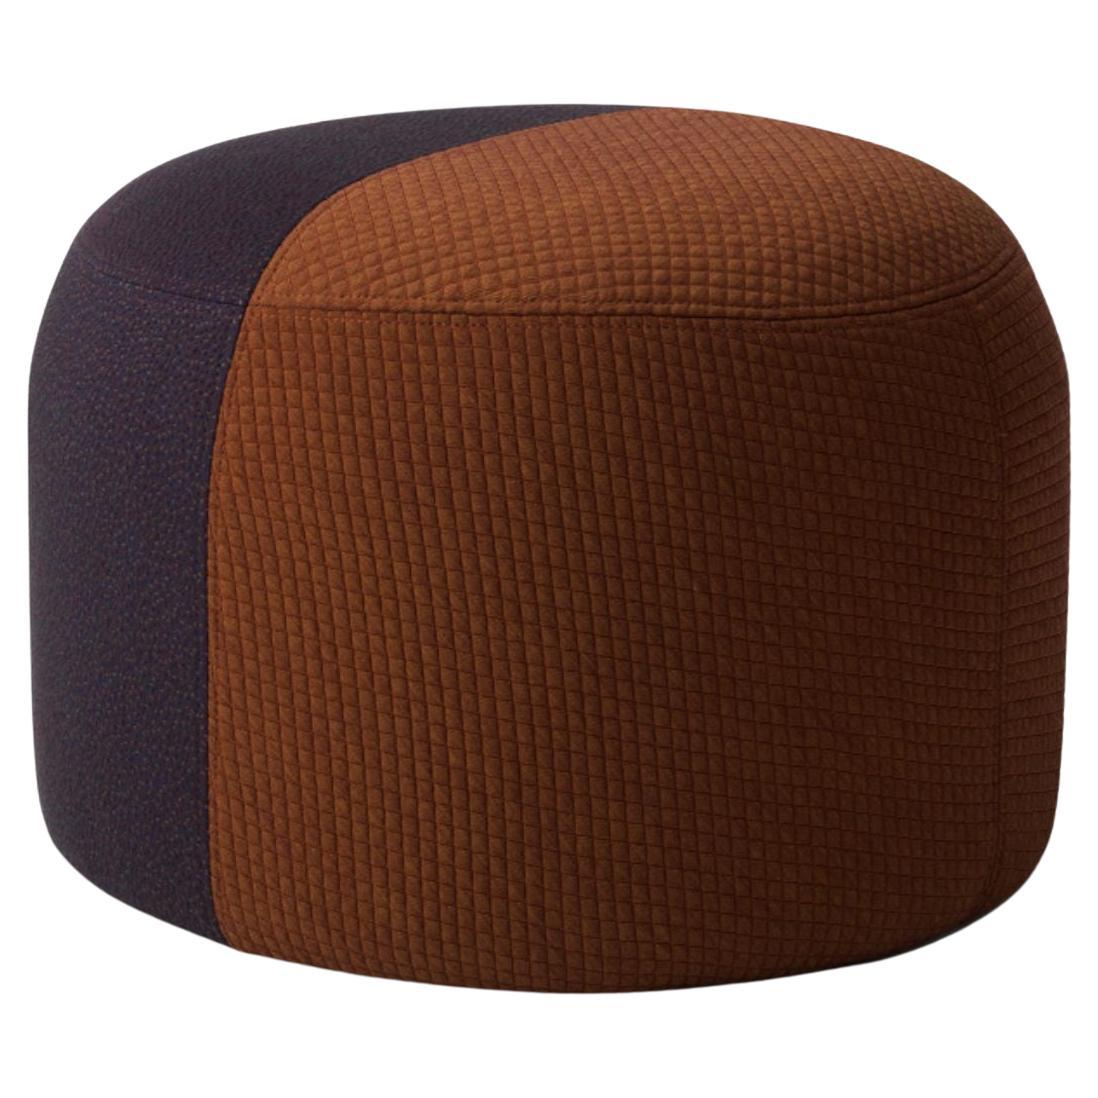 Dainty Pouf Mosaic Sprinkles Rusty Eggplant by Warm Nordic For Sale